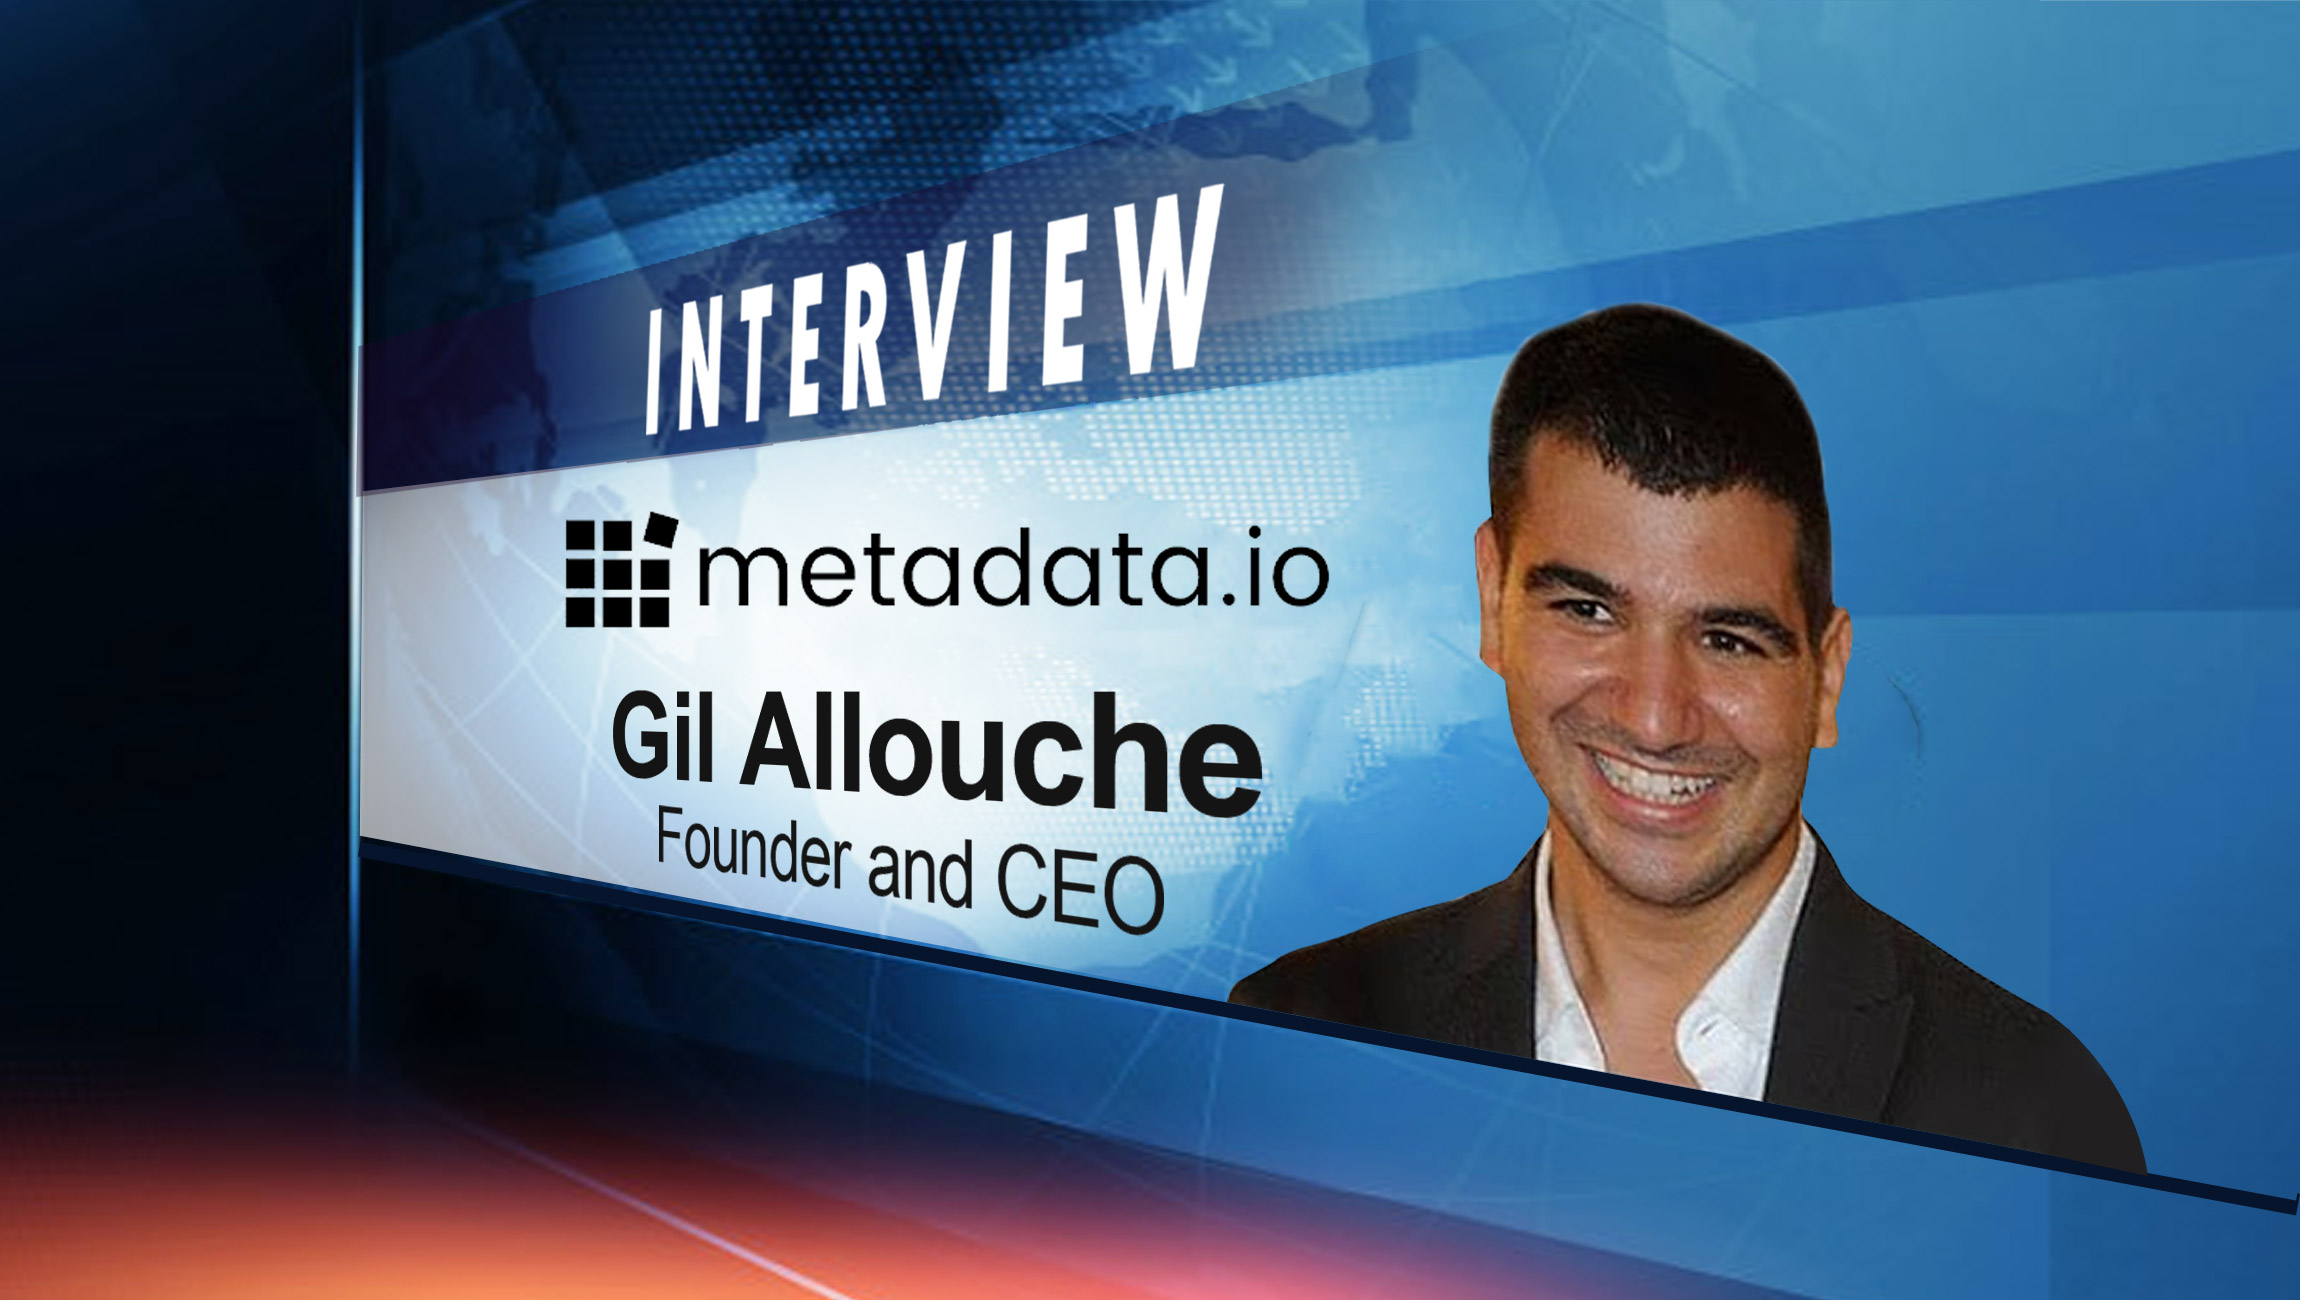 SalesTechStar Interview with Gil Allouche, Founder and CEO at Metadata.io